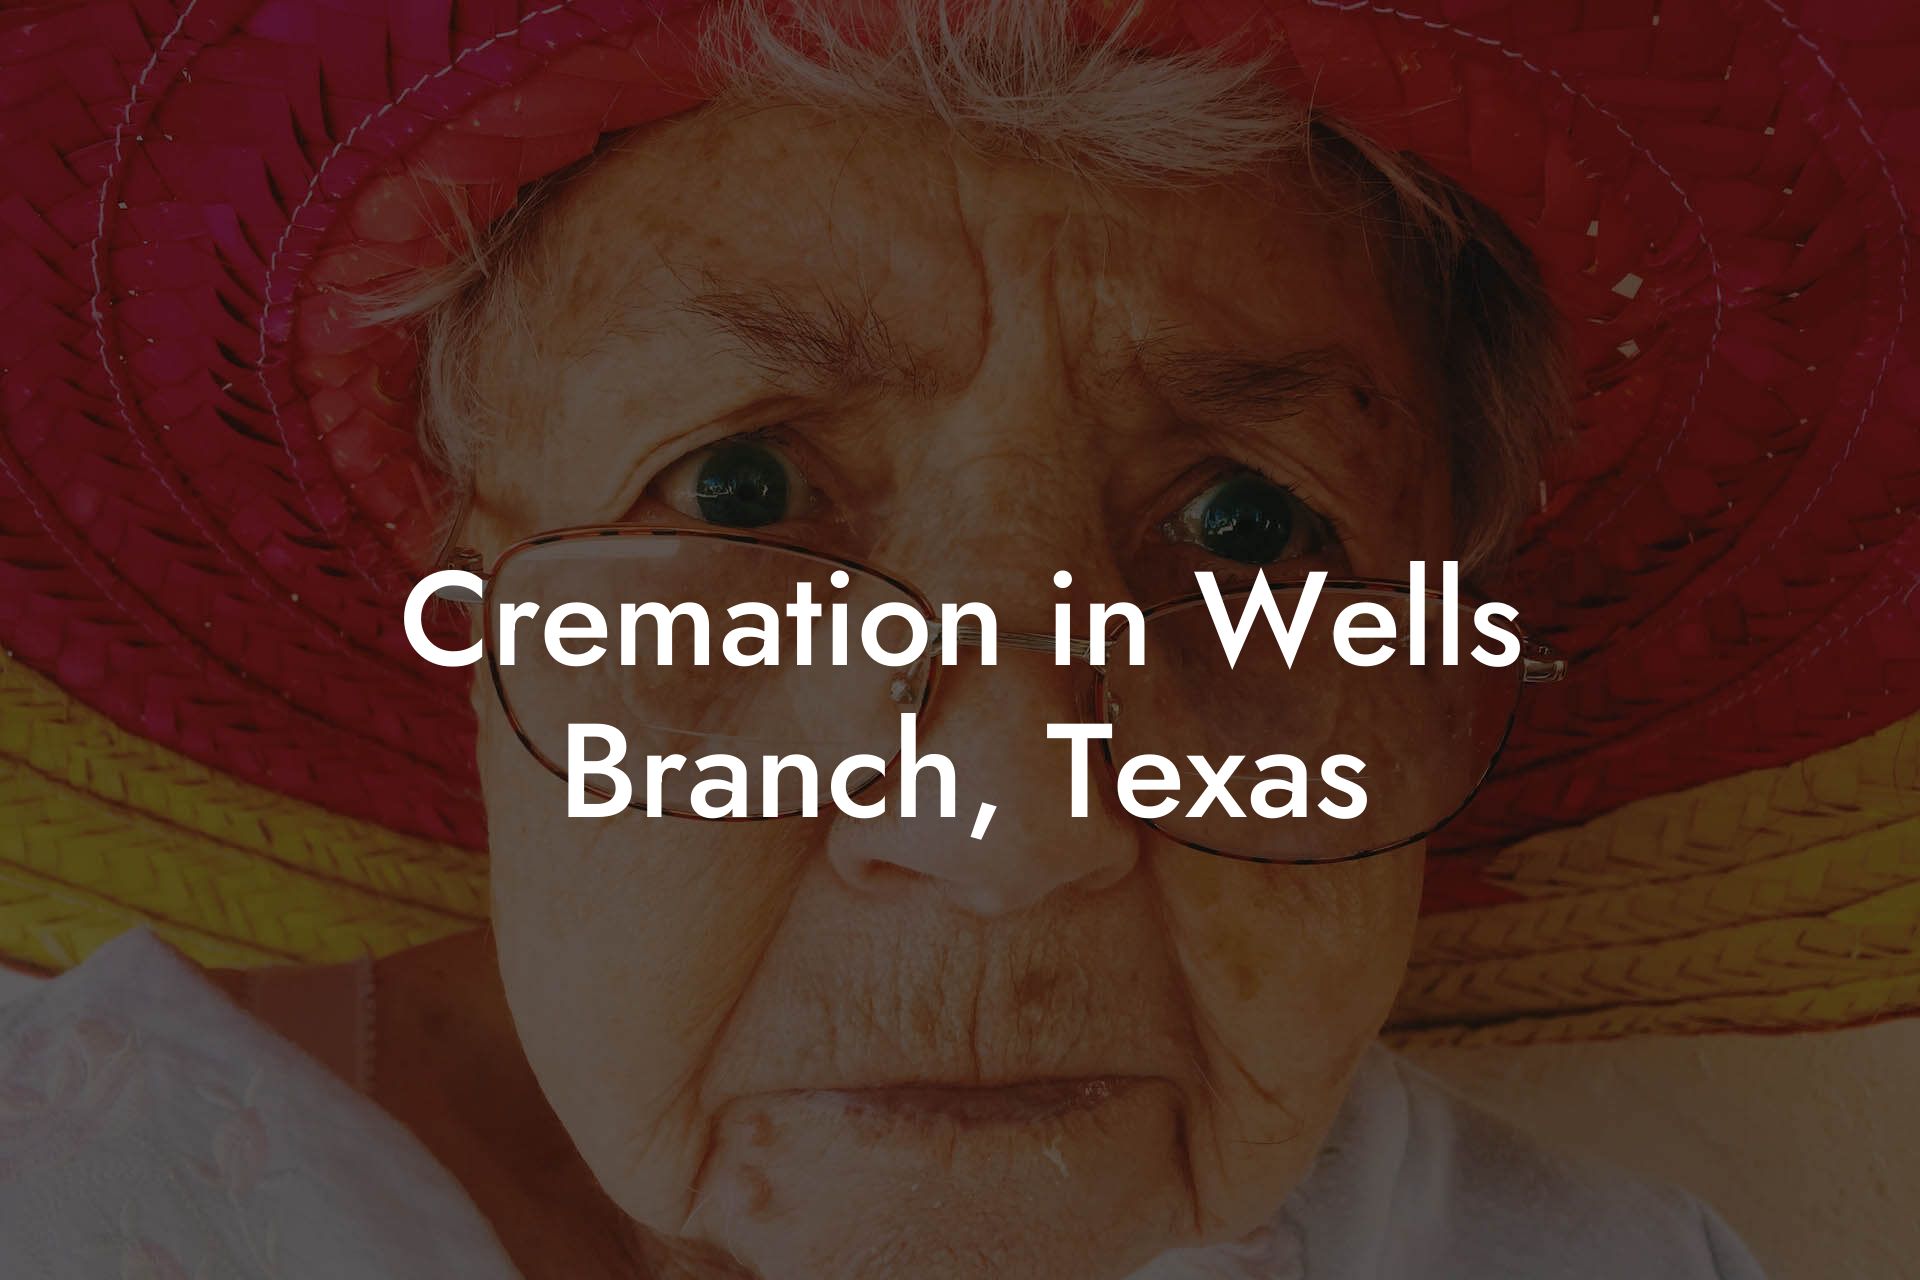 Cremation in Wells Branch, Texas